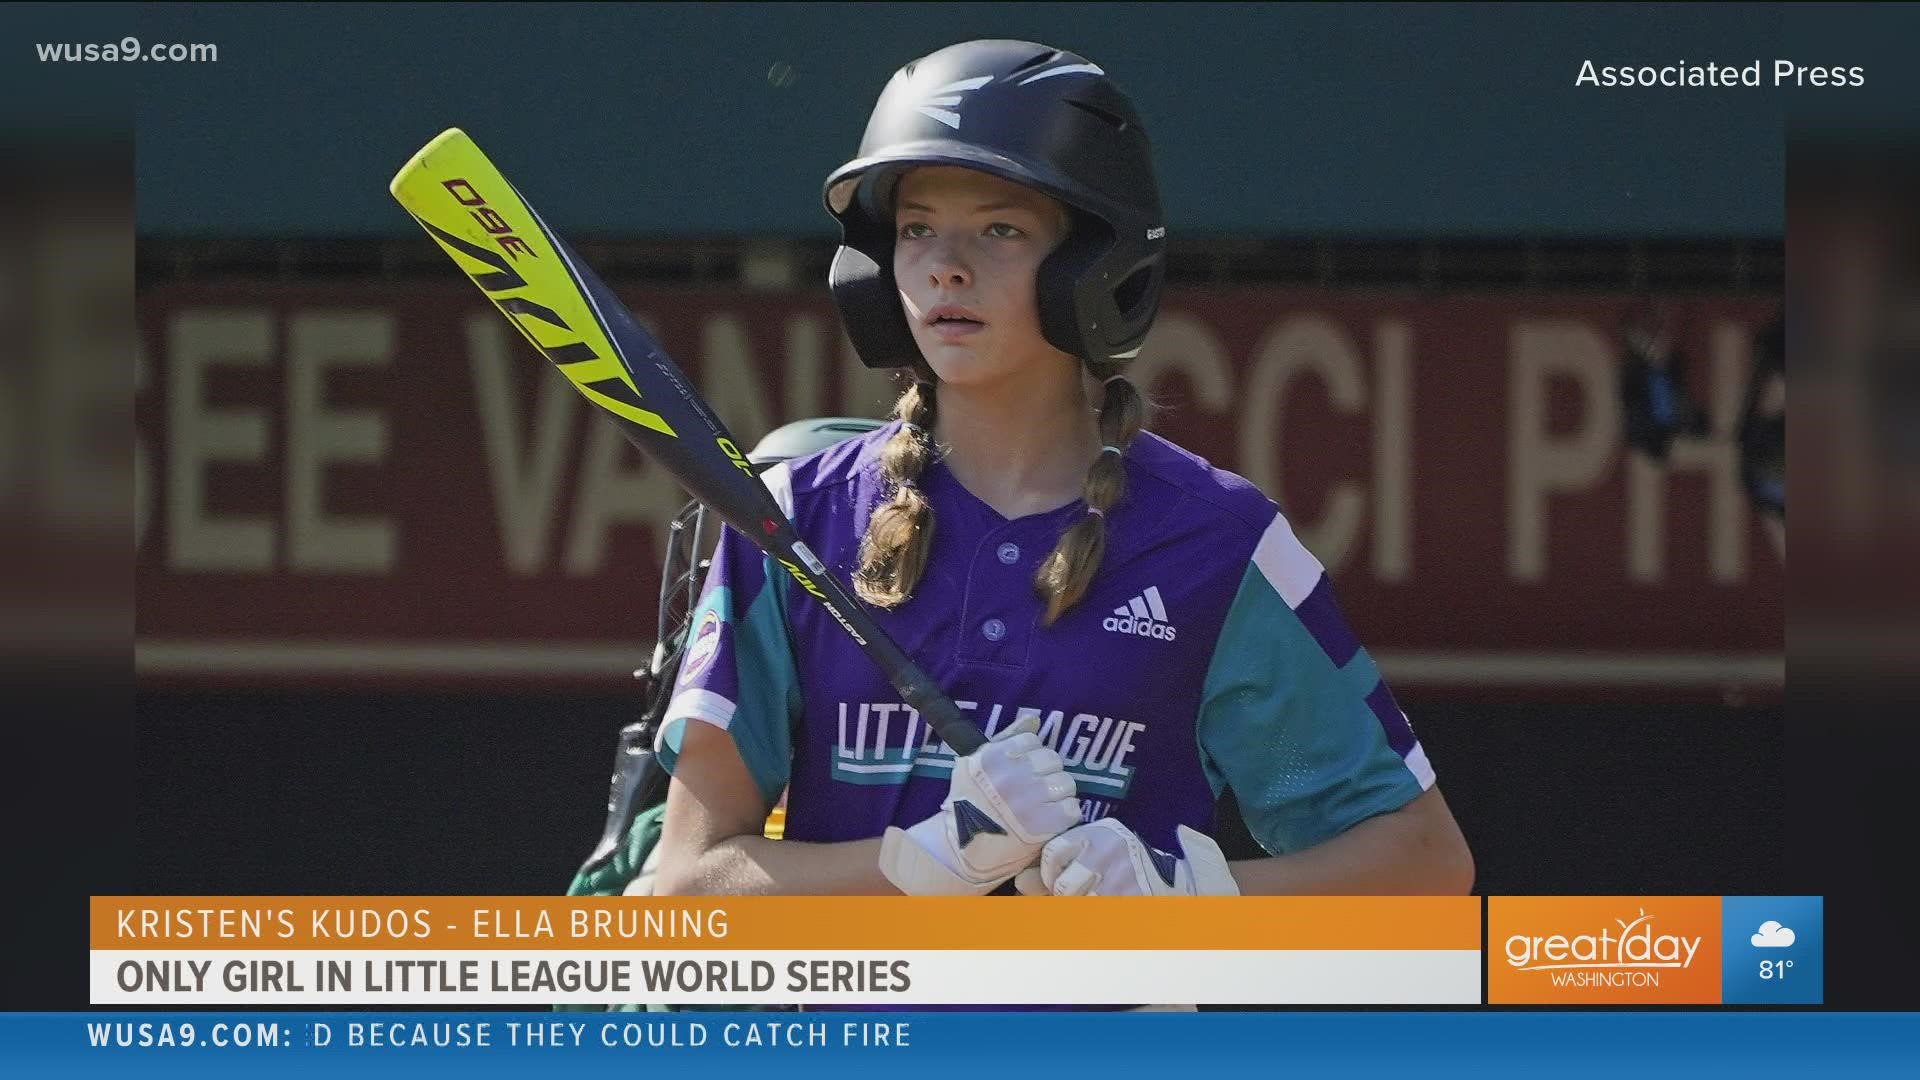 12-year old Ella Bruning is the only girl playing in the 2021 Little League World Series. Kristen's Kudos for August 26, 2021